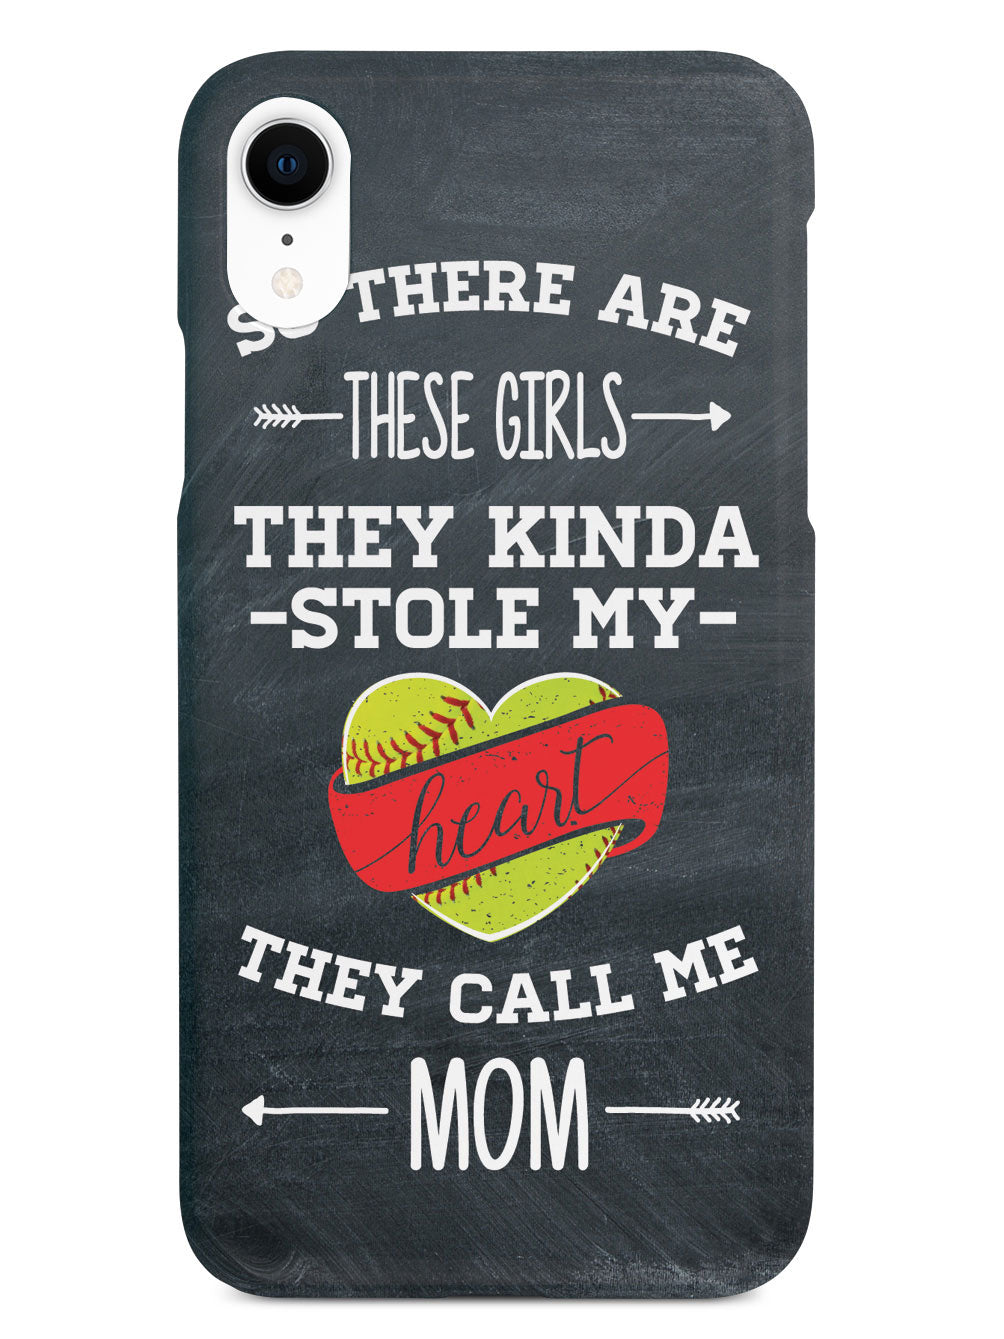 So There Are These Girls - Softball Player - Mom Case